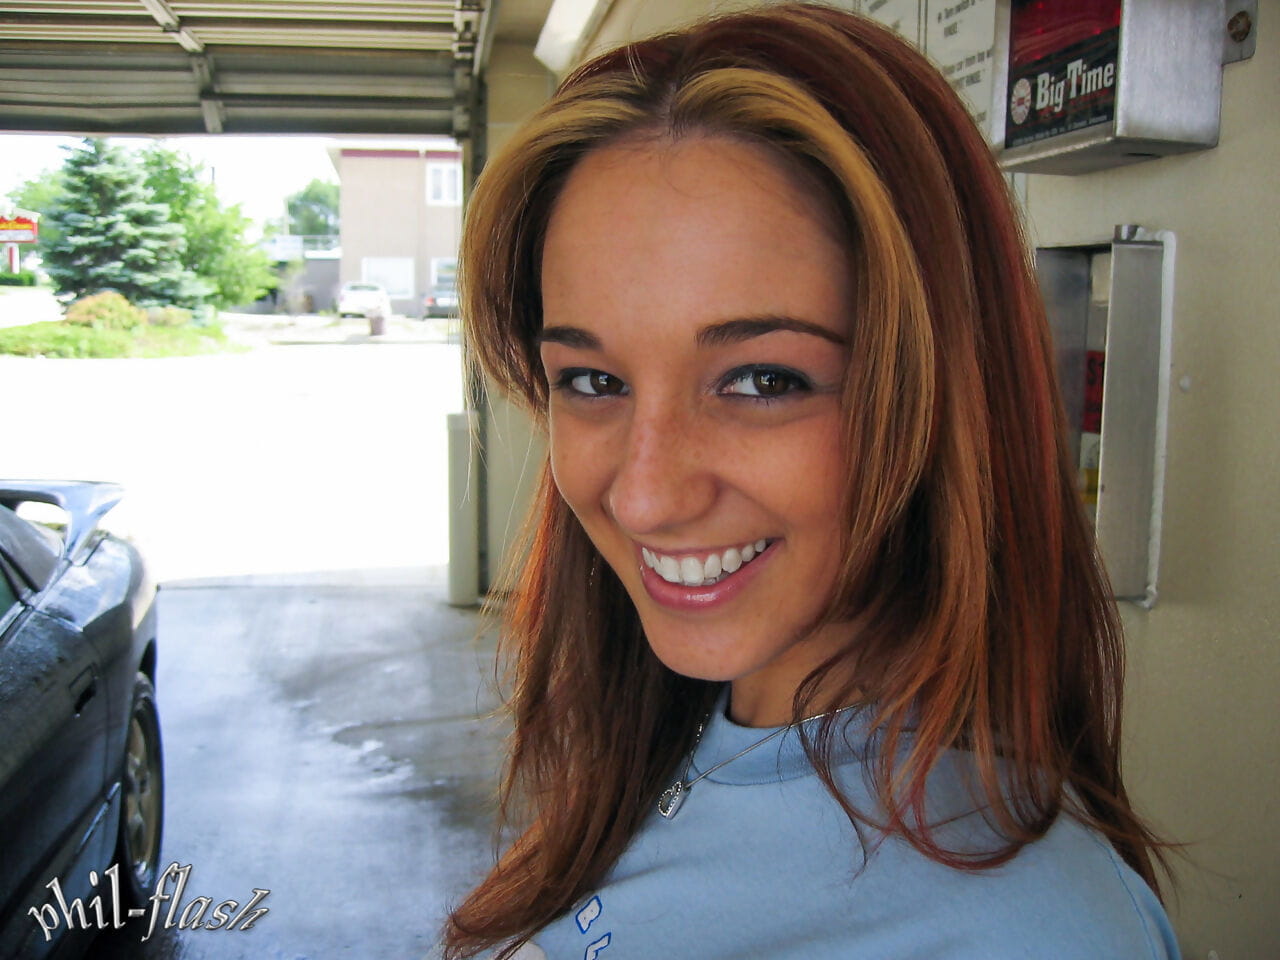 Amateur chick Nikki Sims uncovers big tits while cleaning her ride at car wash